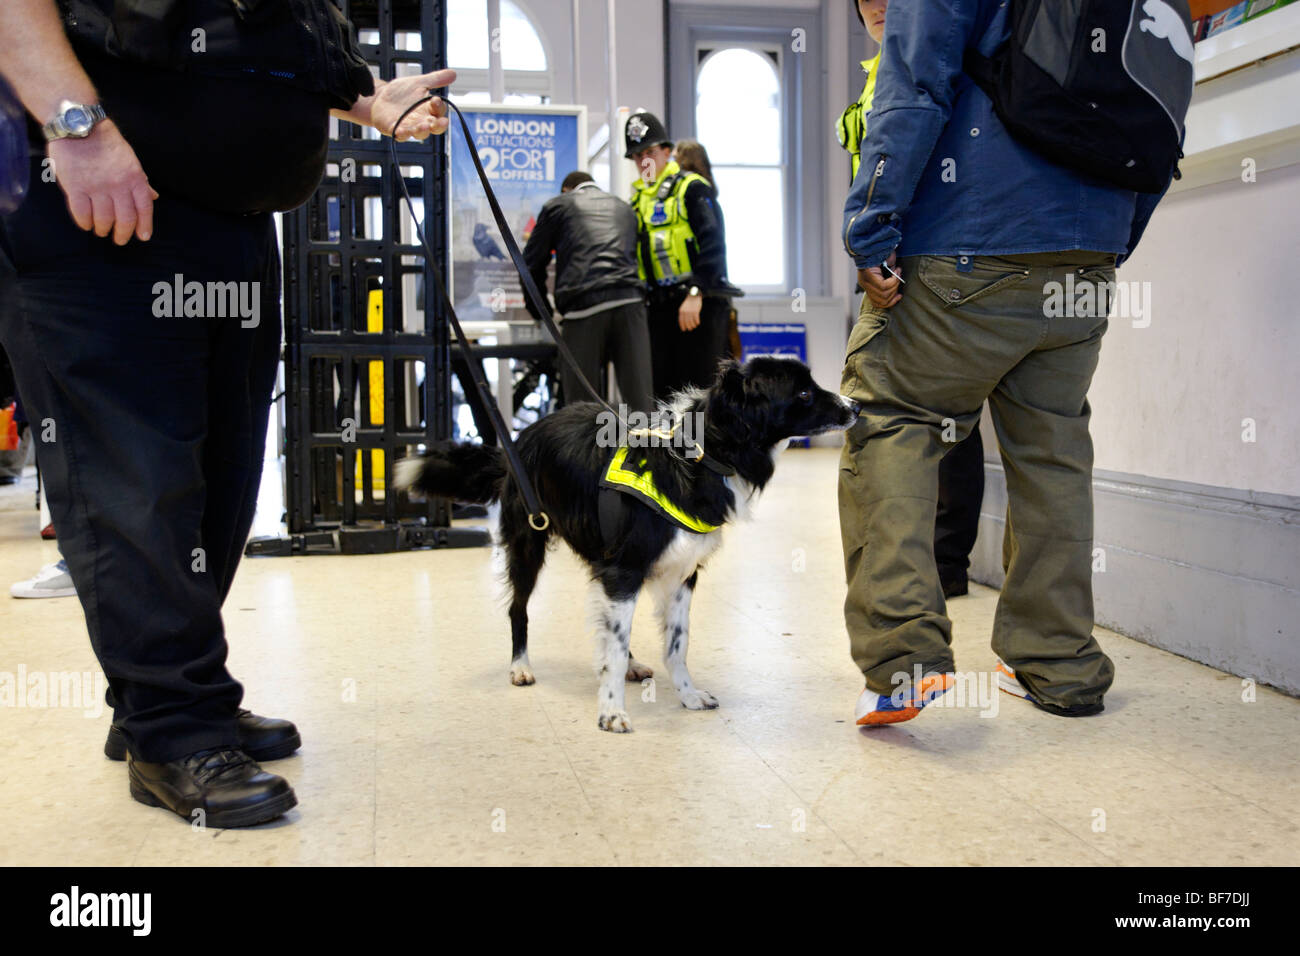 British Transport Police using  a drugs sniffer dog during routine neighborhood policing at Lewisham train station. London Stock Photo